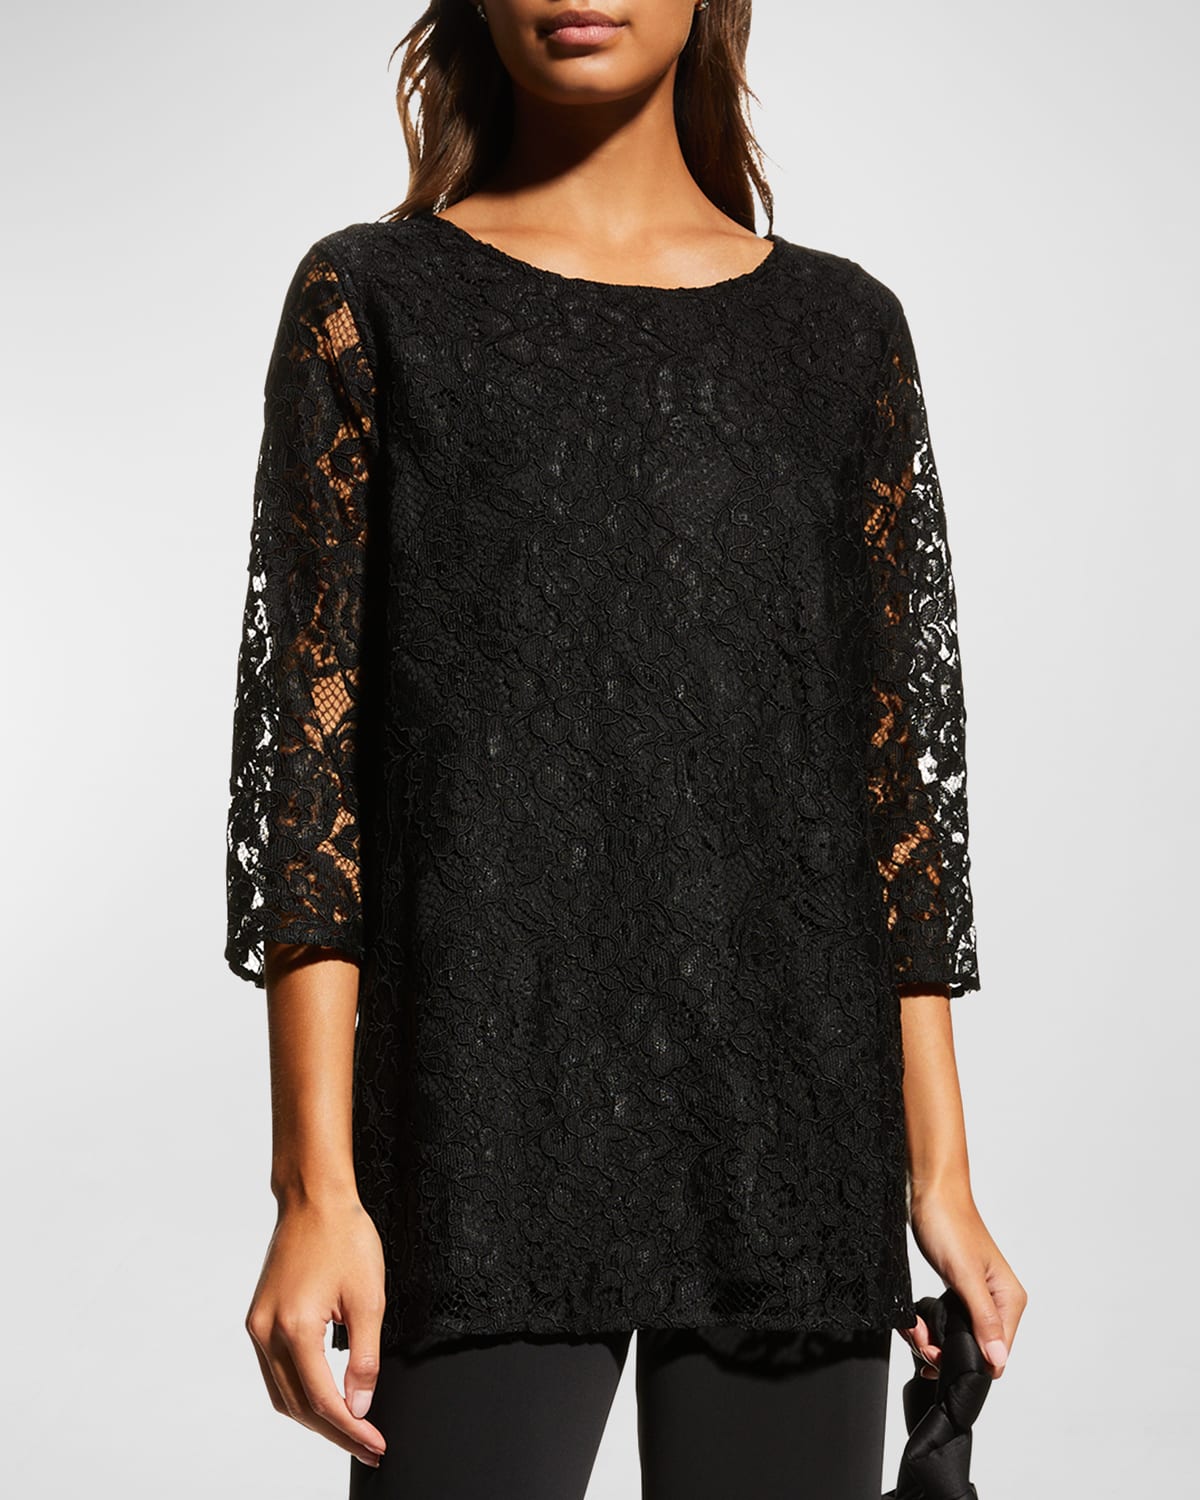 Caroline Rose Lined Floral Lace Easy Tunic